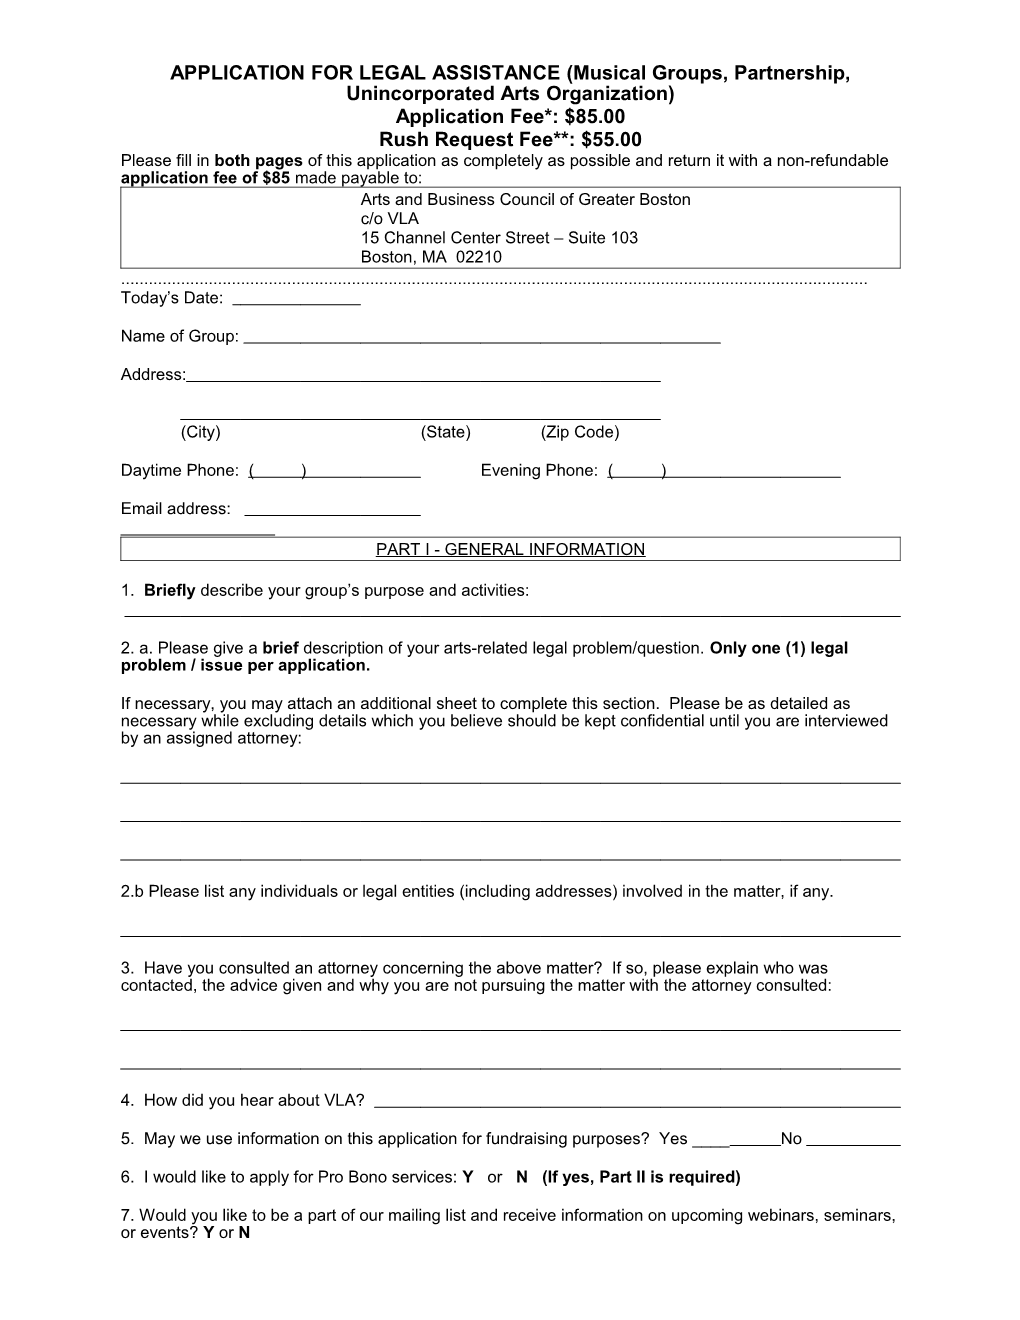 APPLICATION for LEGAL ASSISTANCE (Individual)